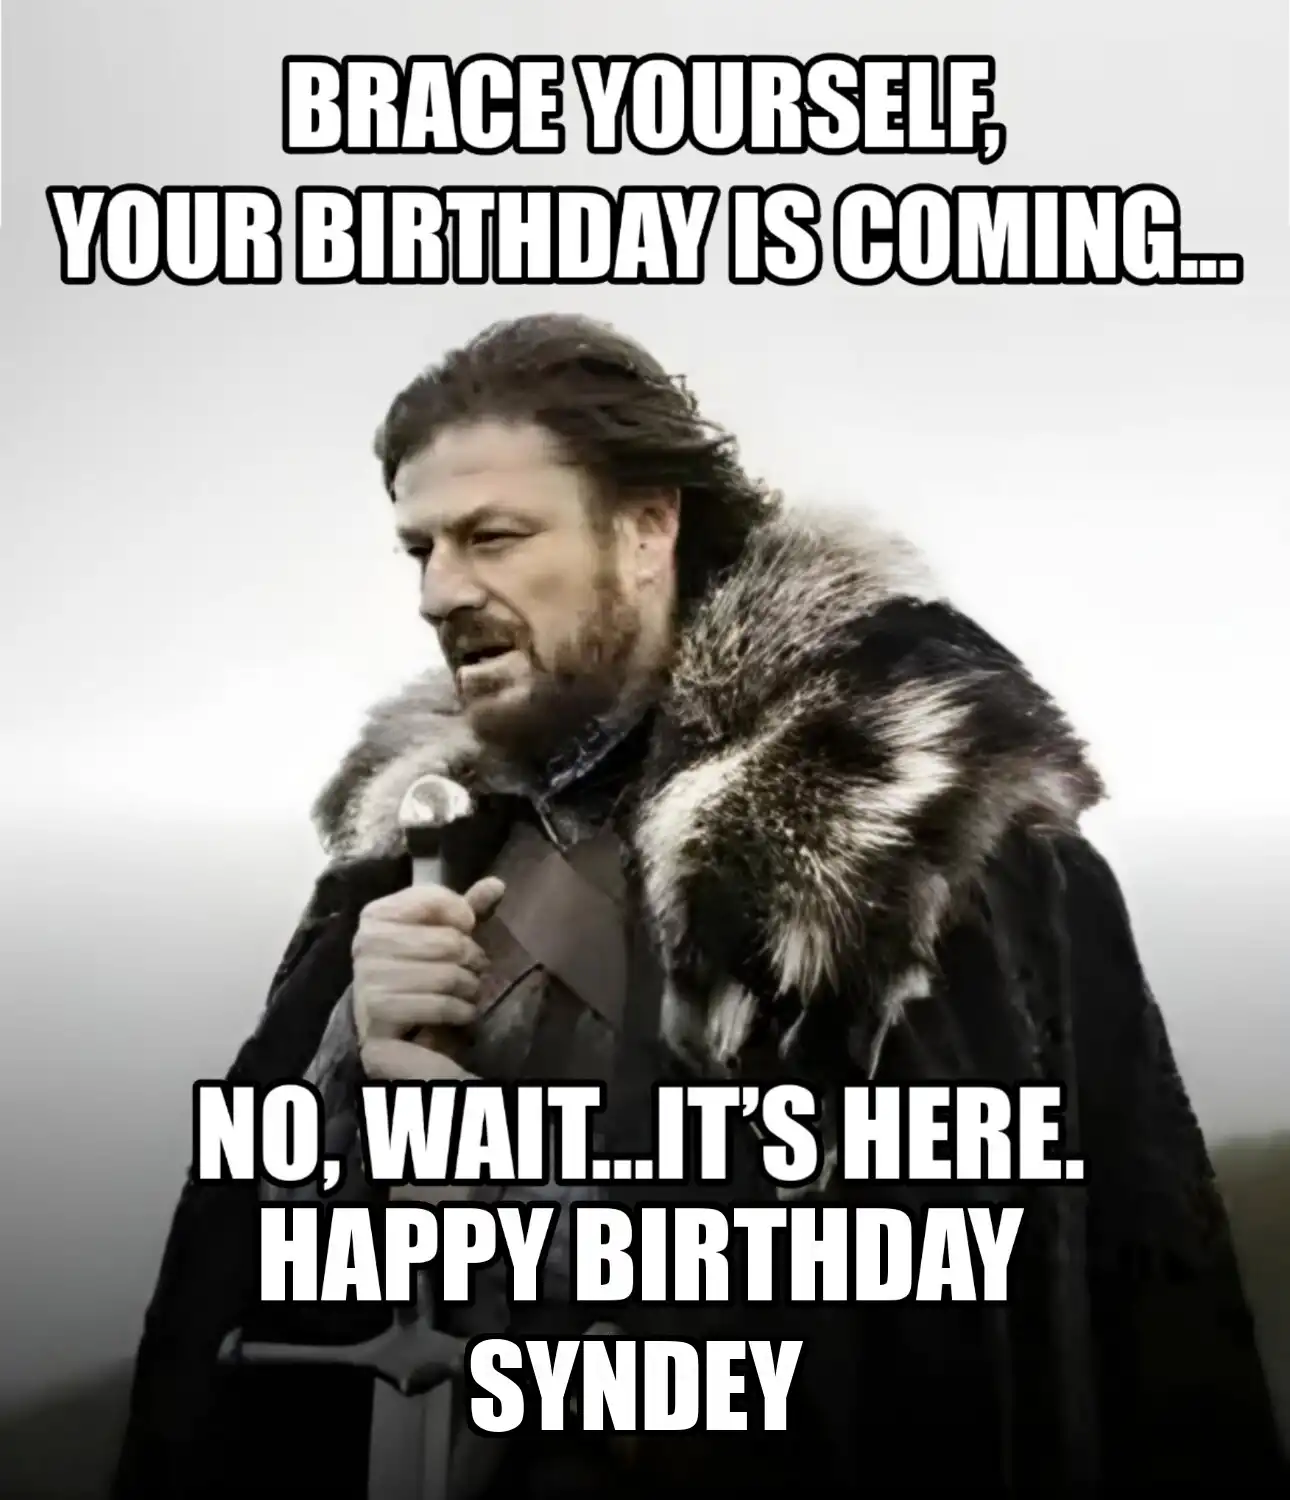 Happy Birthday Syndey Brace Yourself Your Birthday Is Coming Meme